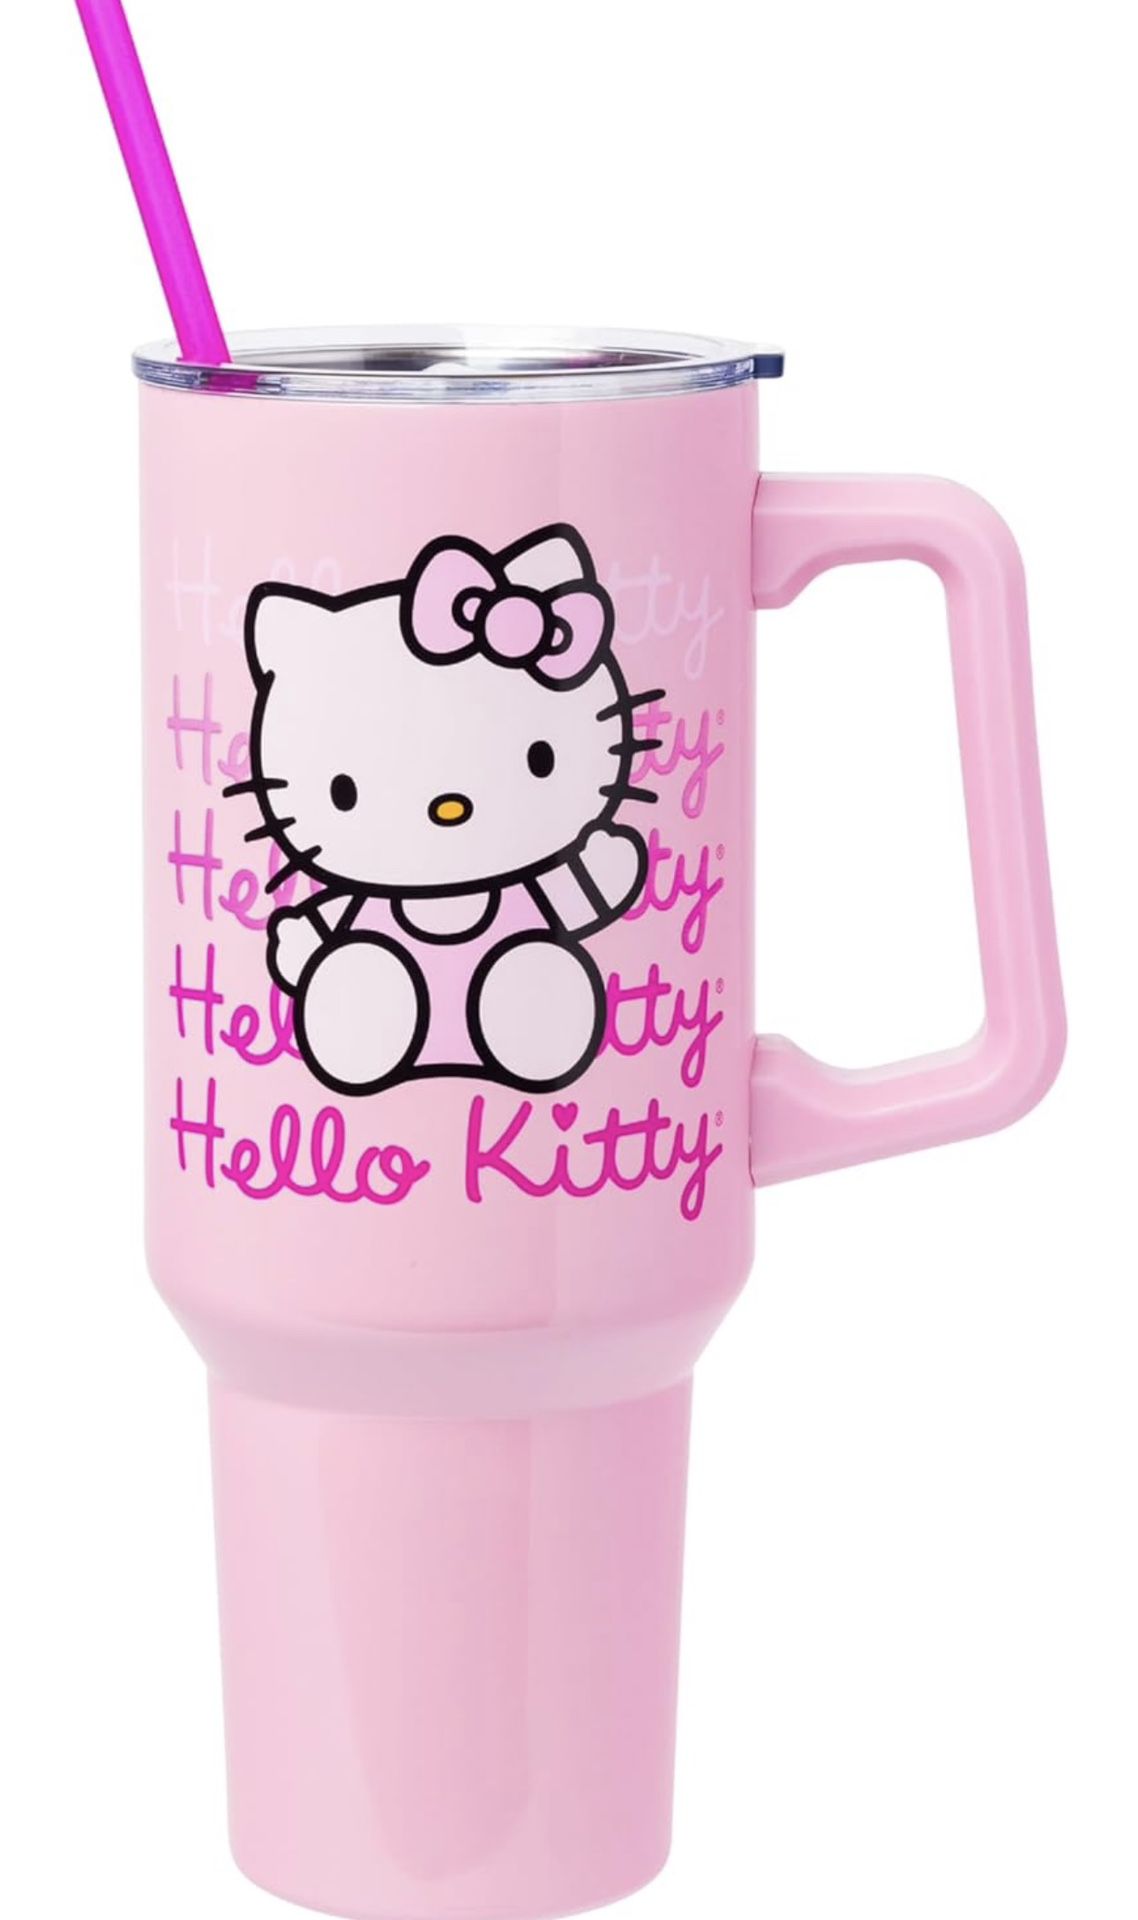 Sanrio Hello Kitty Waving Stainless Steel Tumbler with Handle and Straw, Fits in Standard Cup Holder, 40 Ounces